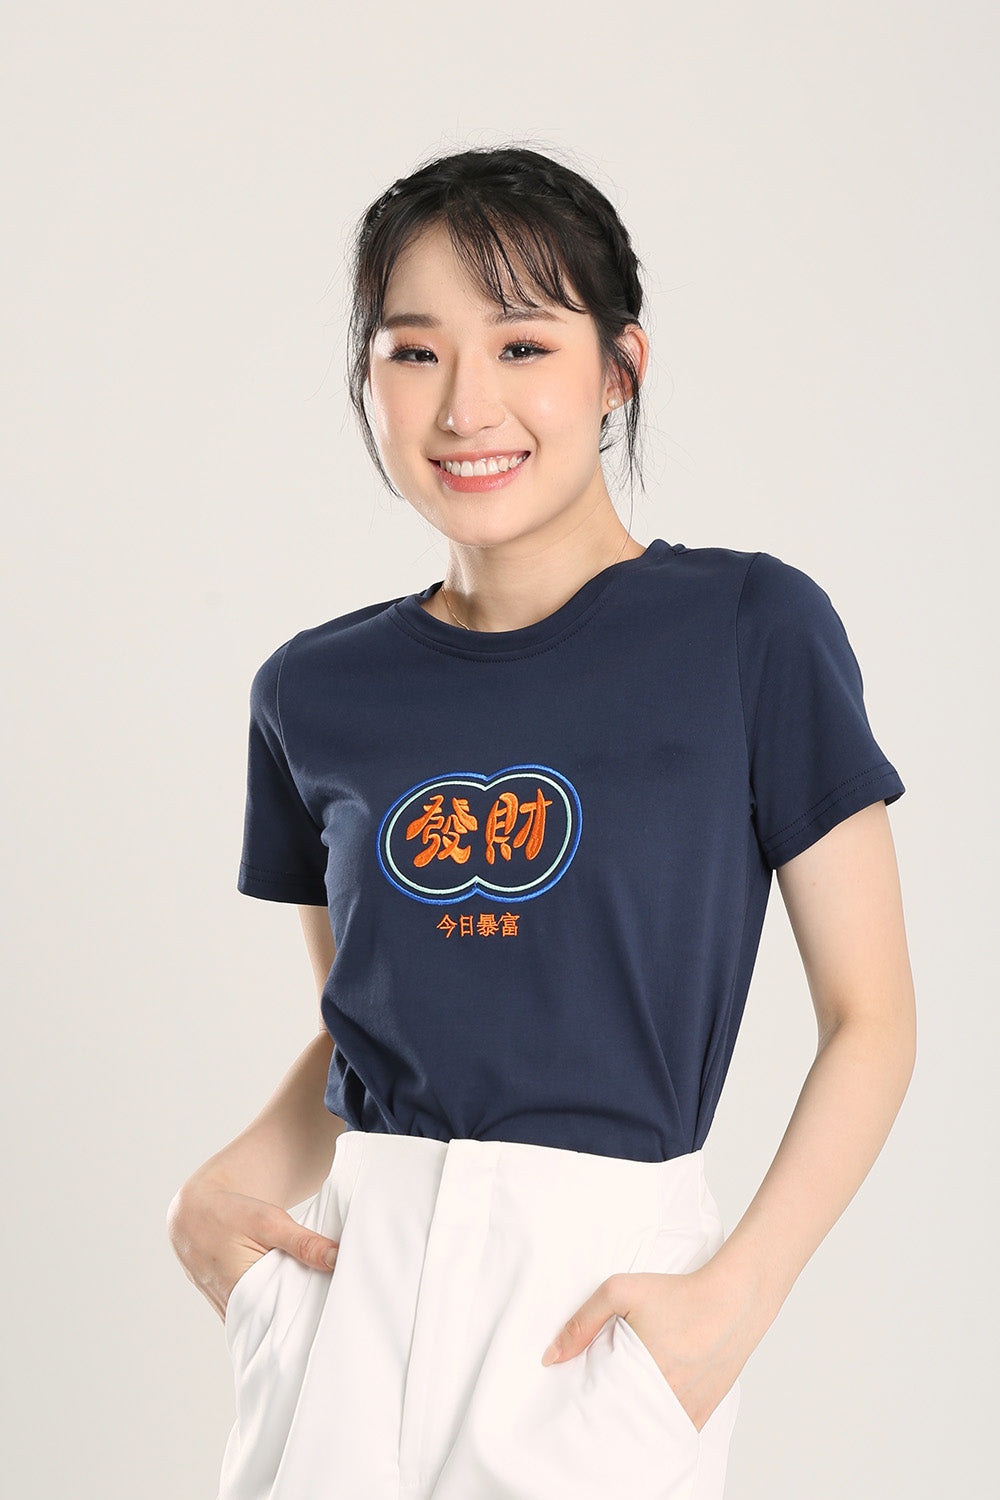 Fatt Chai Embroidered Top in Navy Blue